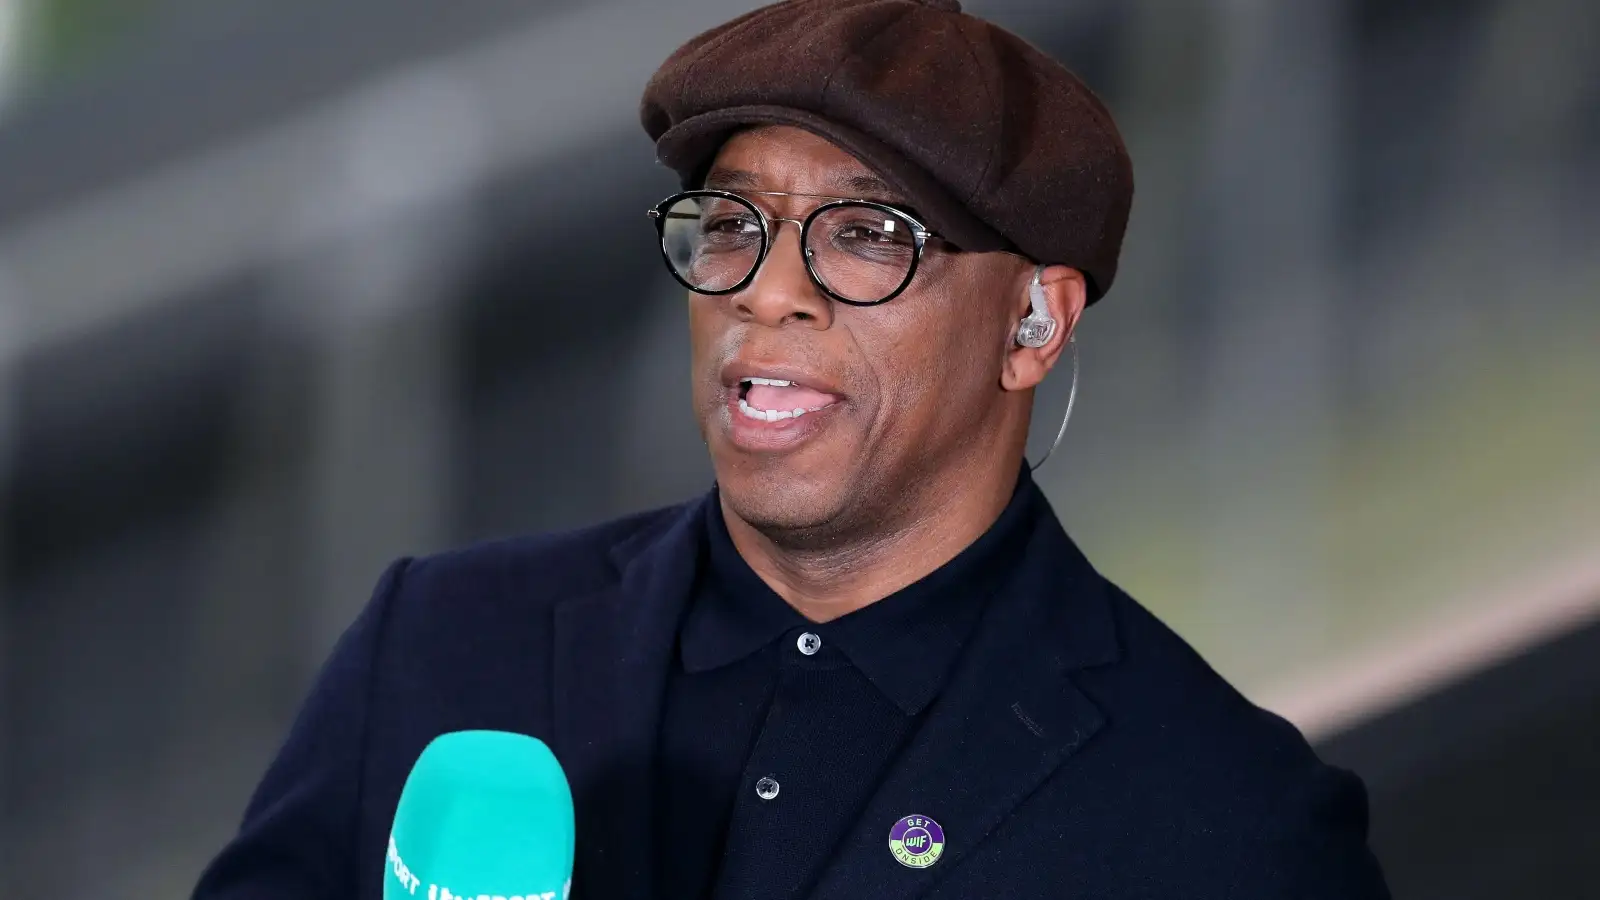 Ian Wright during ITV coverage